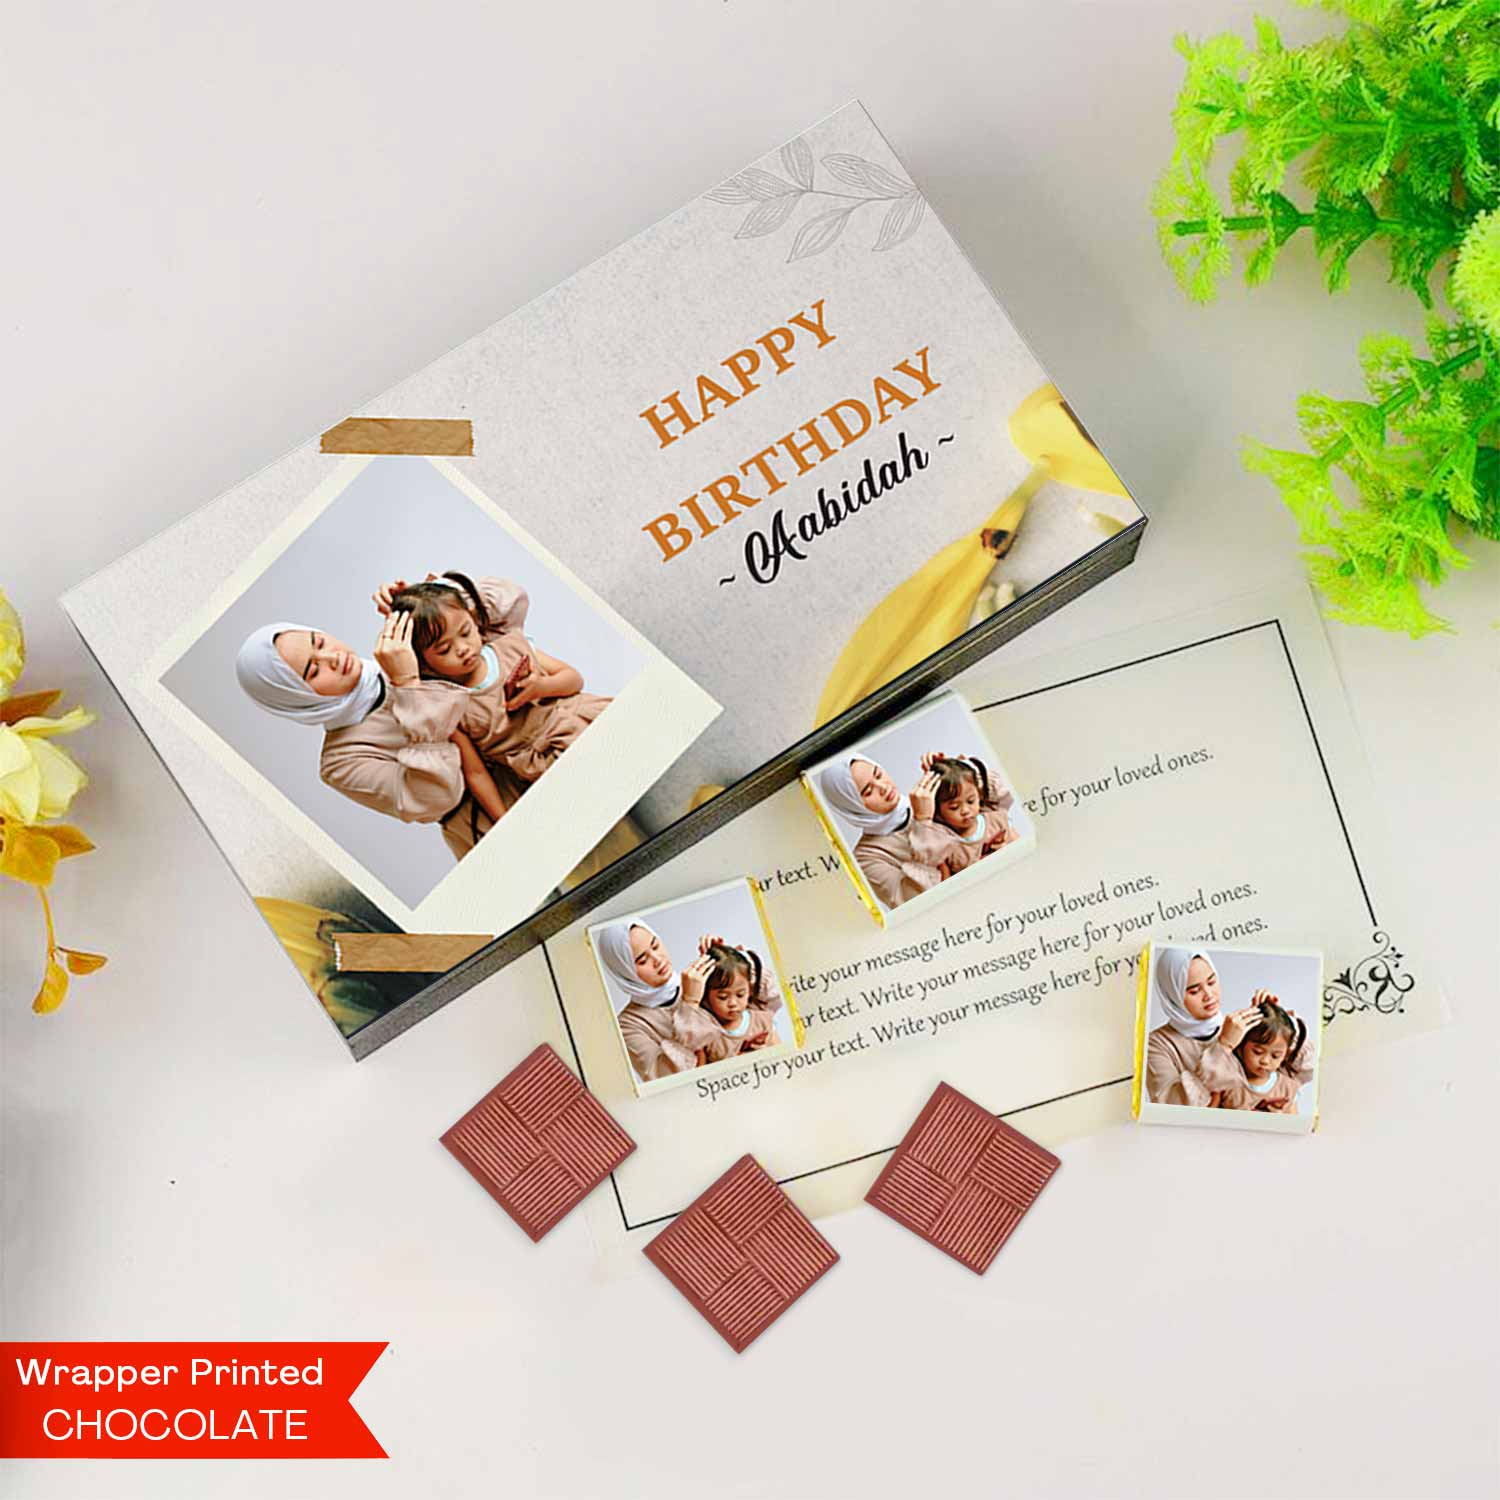  unique personalised gifts india unique personalized birthday gifts for her customized birthday gifts india customised gifts for birthday online customised gifts for birthday near me personalized gifts for birthday girl customized birthday gifts instagram customised birthday gifts for him